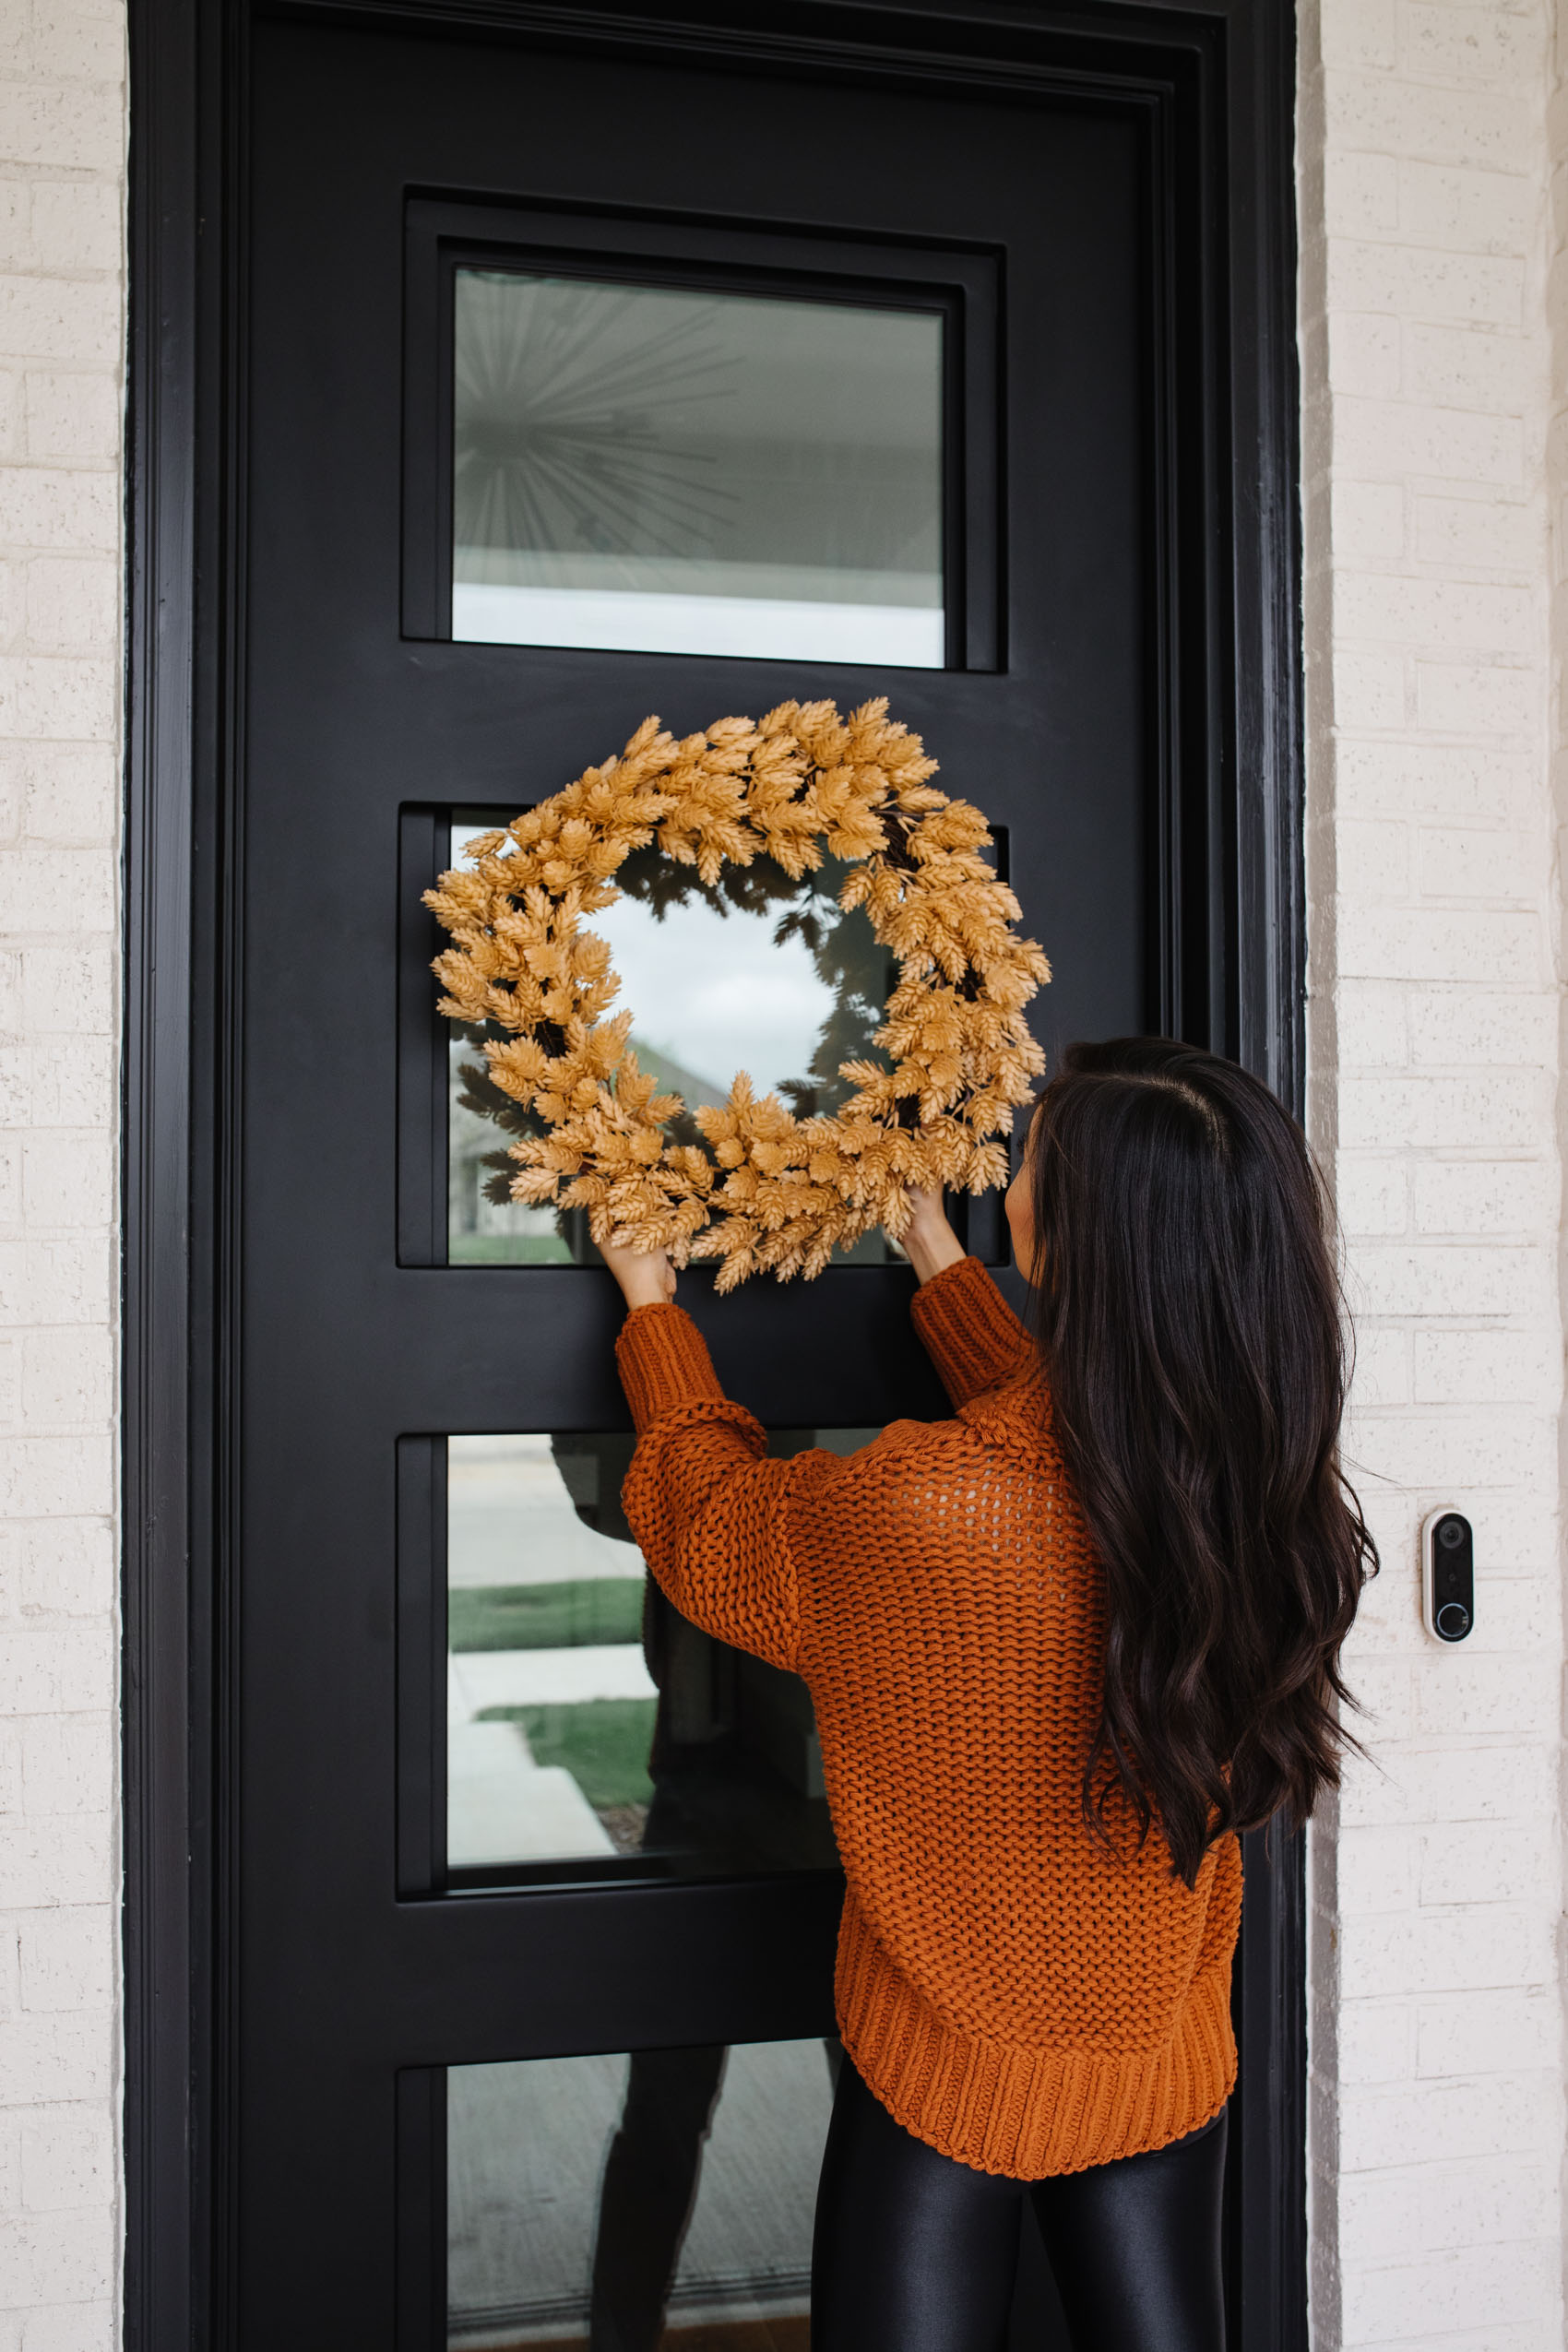 Blogger Hoang-Kim hanging a fall Target wreath on her iron front door outside her Dallas home